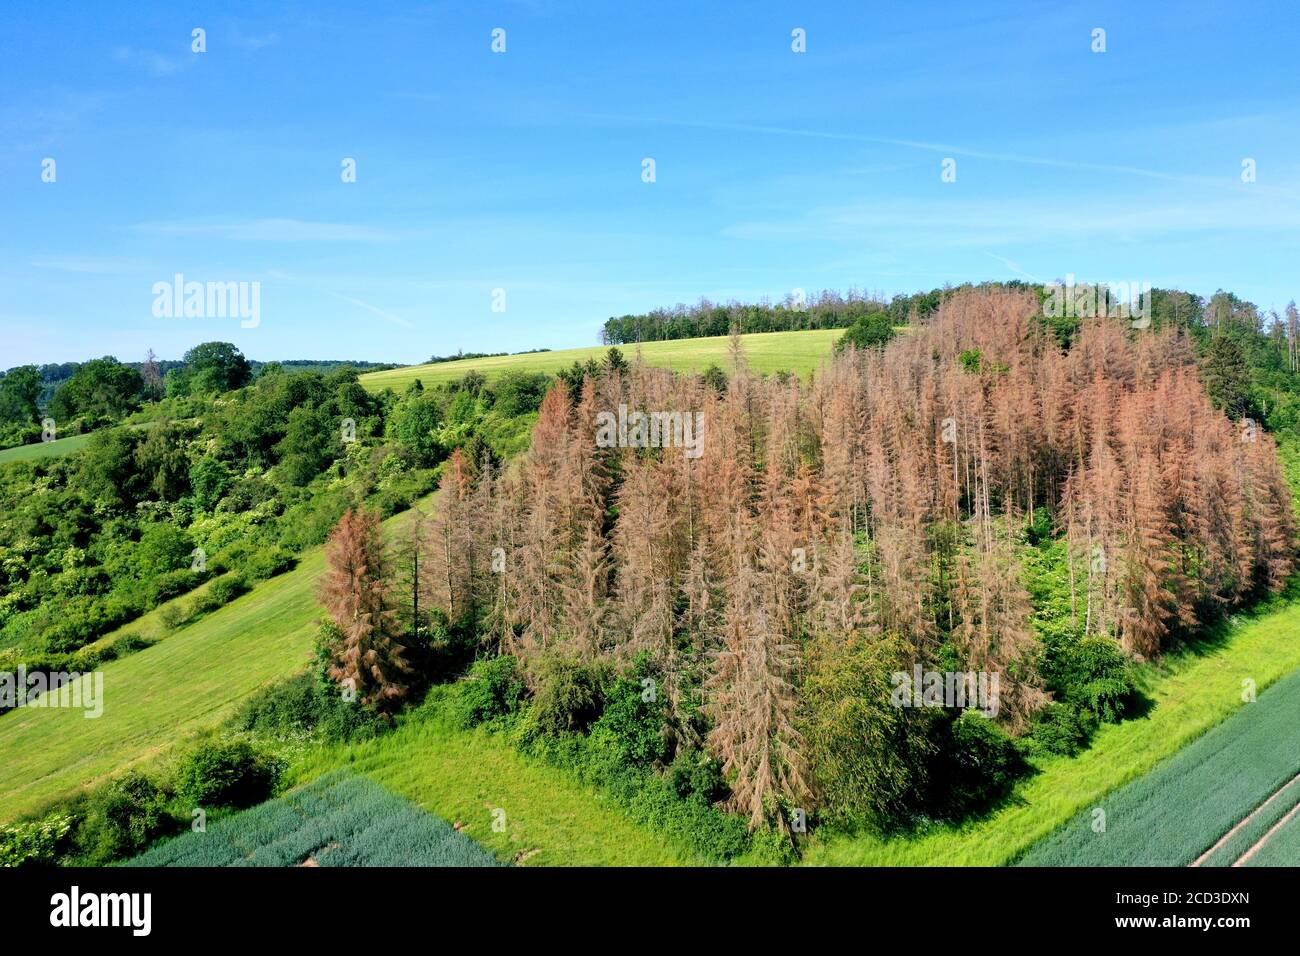 Norway spruce (Picea abies), dead spruce forest caused by dryness and bark beetle, 02.06.2020, aerial view, Germany Stock Photo